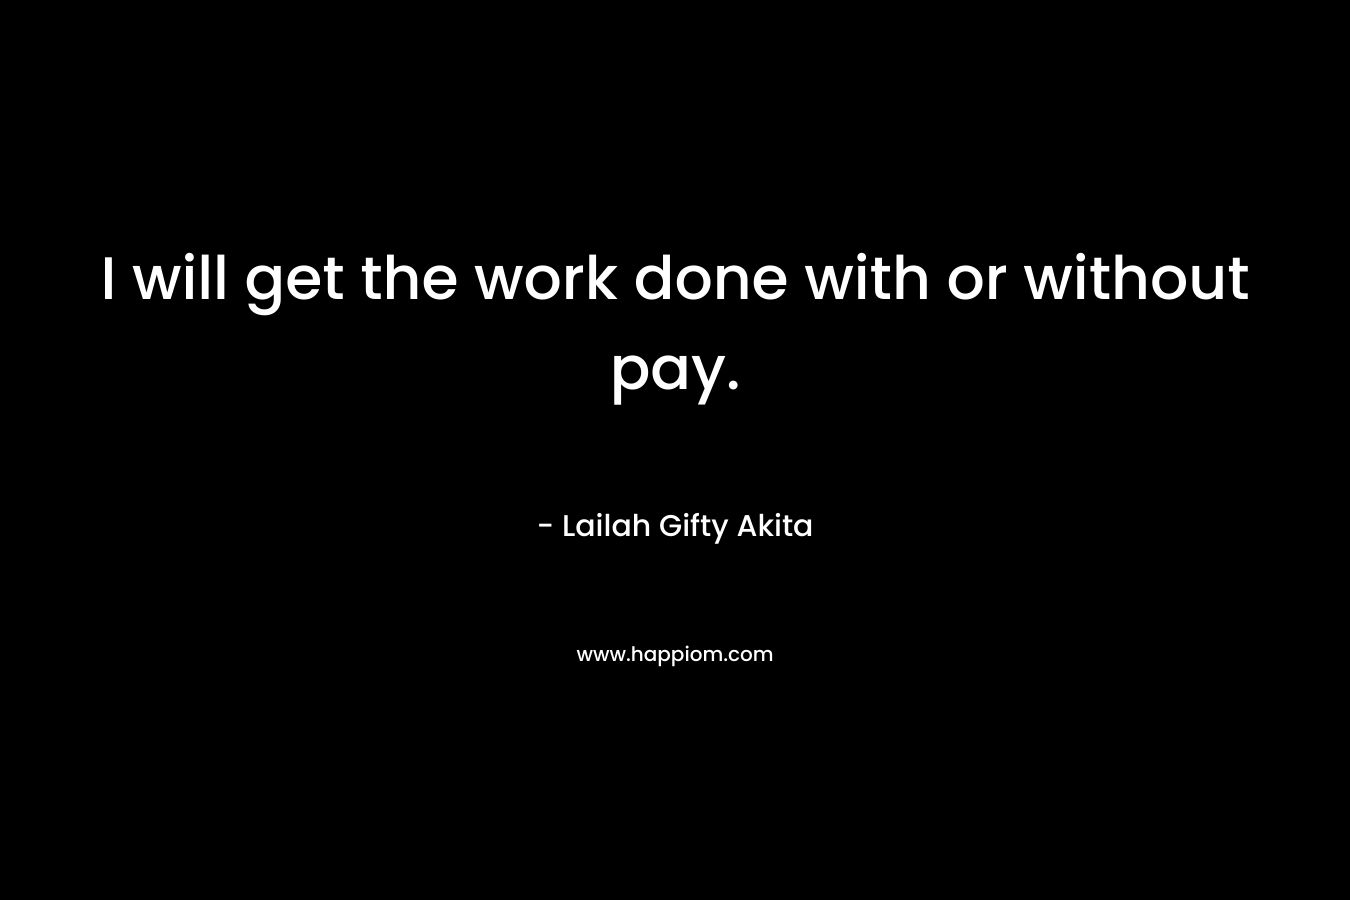 I will get the work done with or without pay.